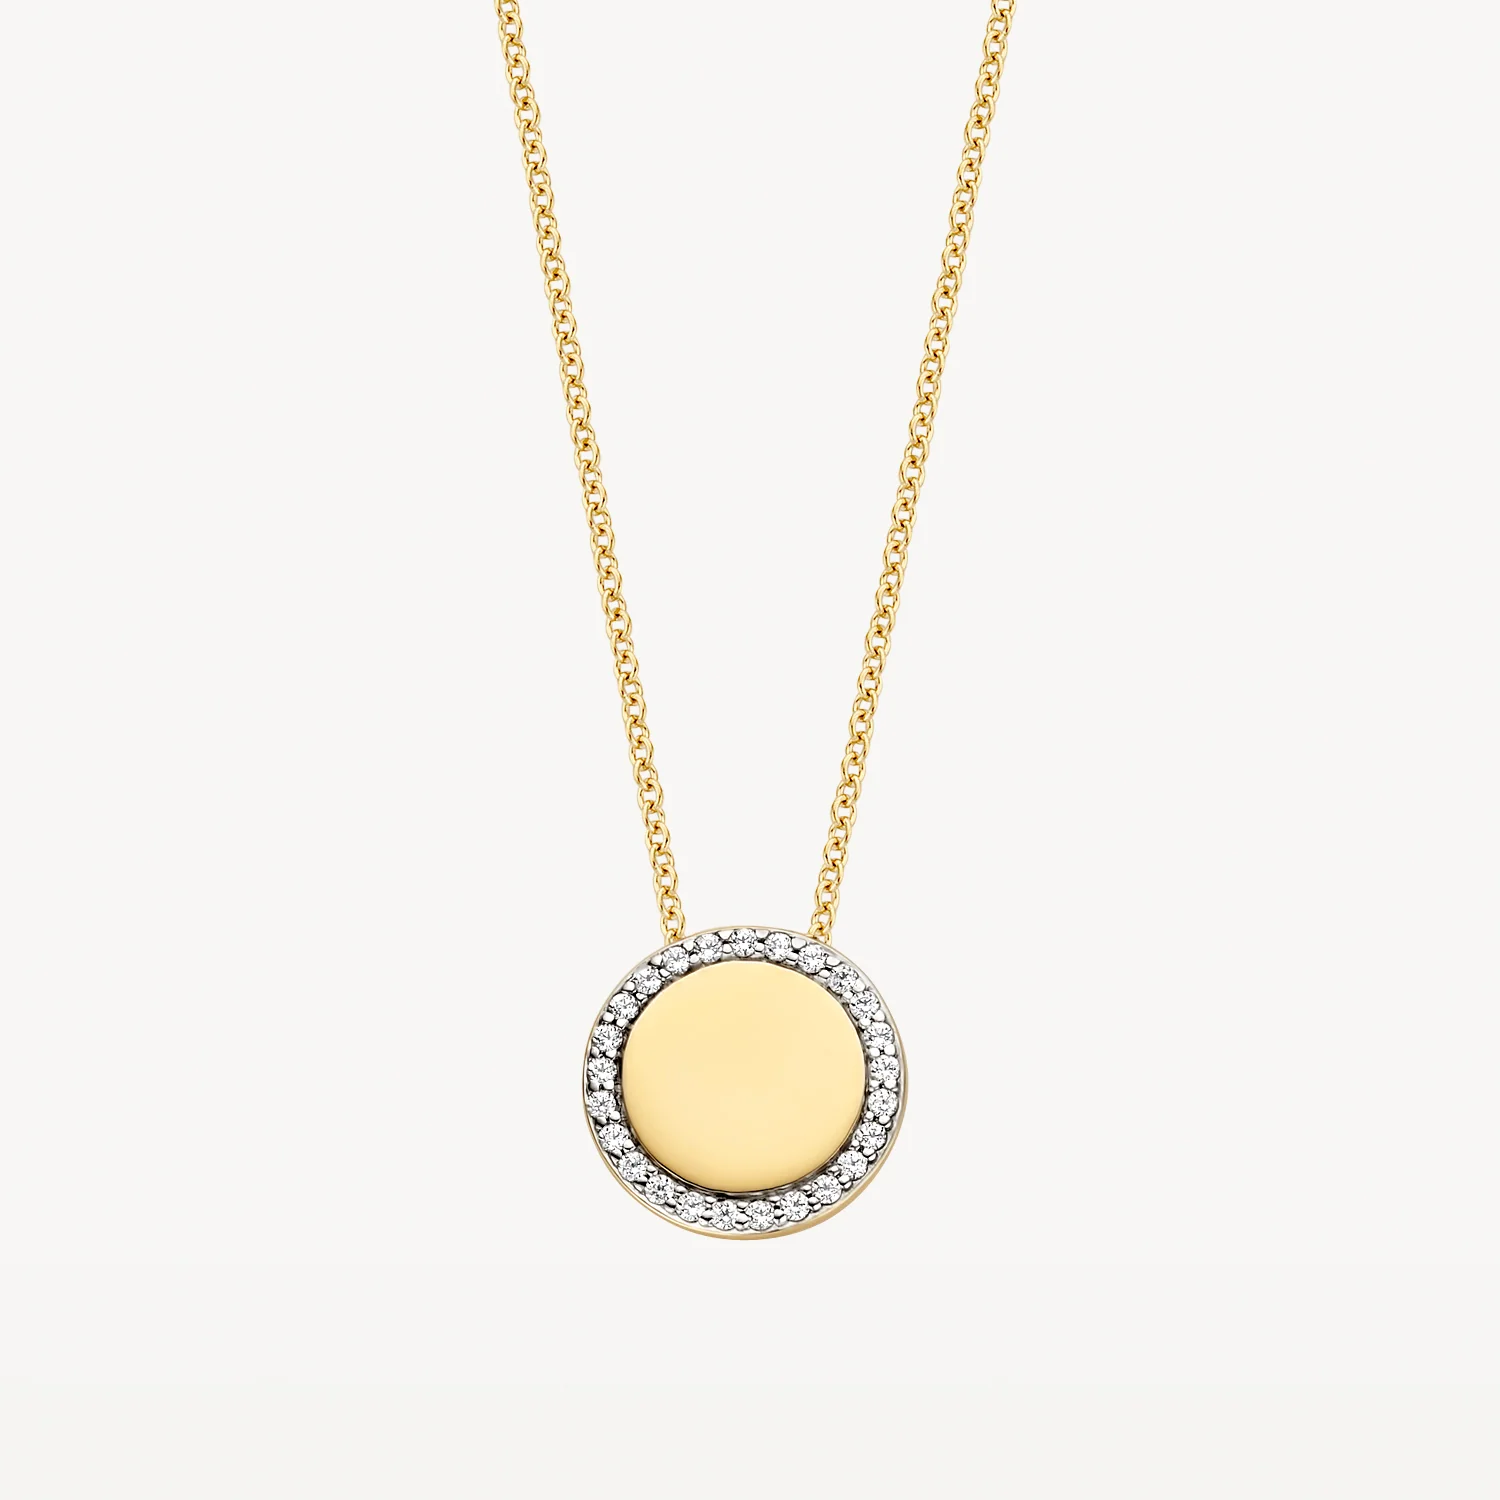 Blush Yellow Gold & CZ Disc Necklace